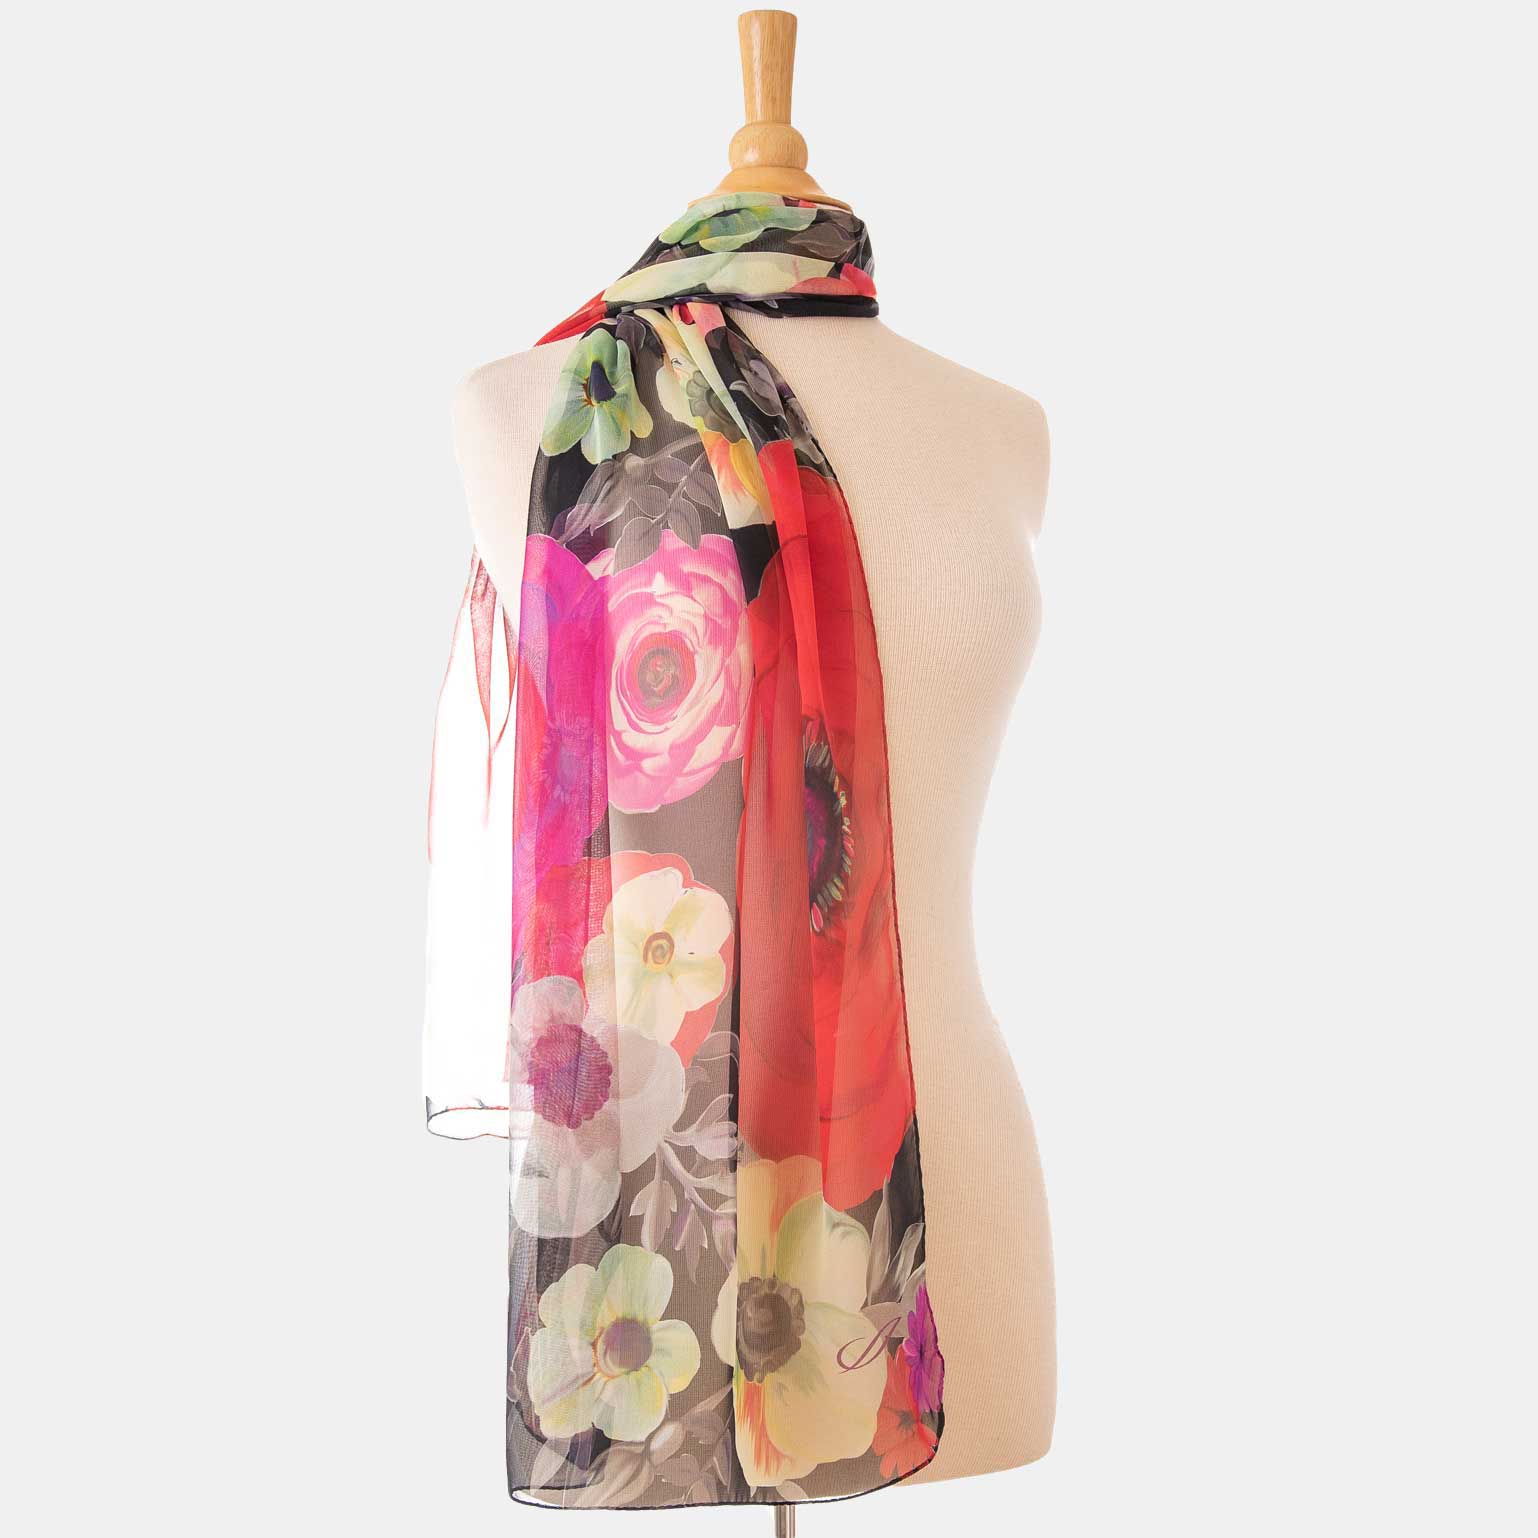 Womens Long Silk Scarf - Black and Red Floral Print